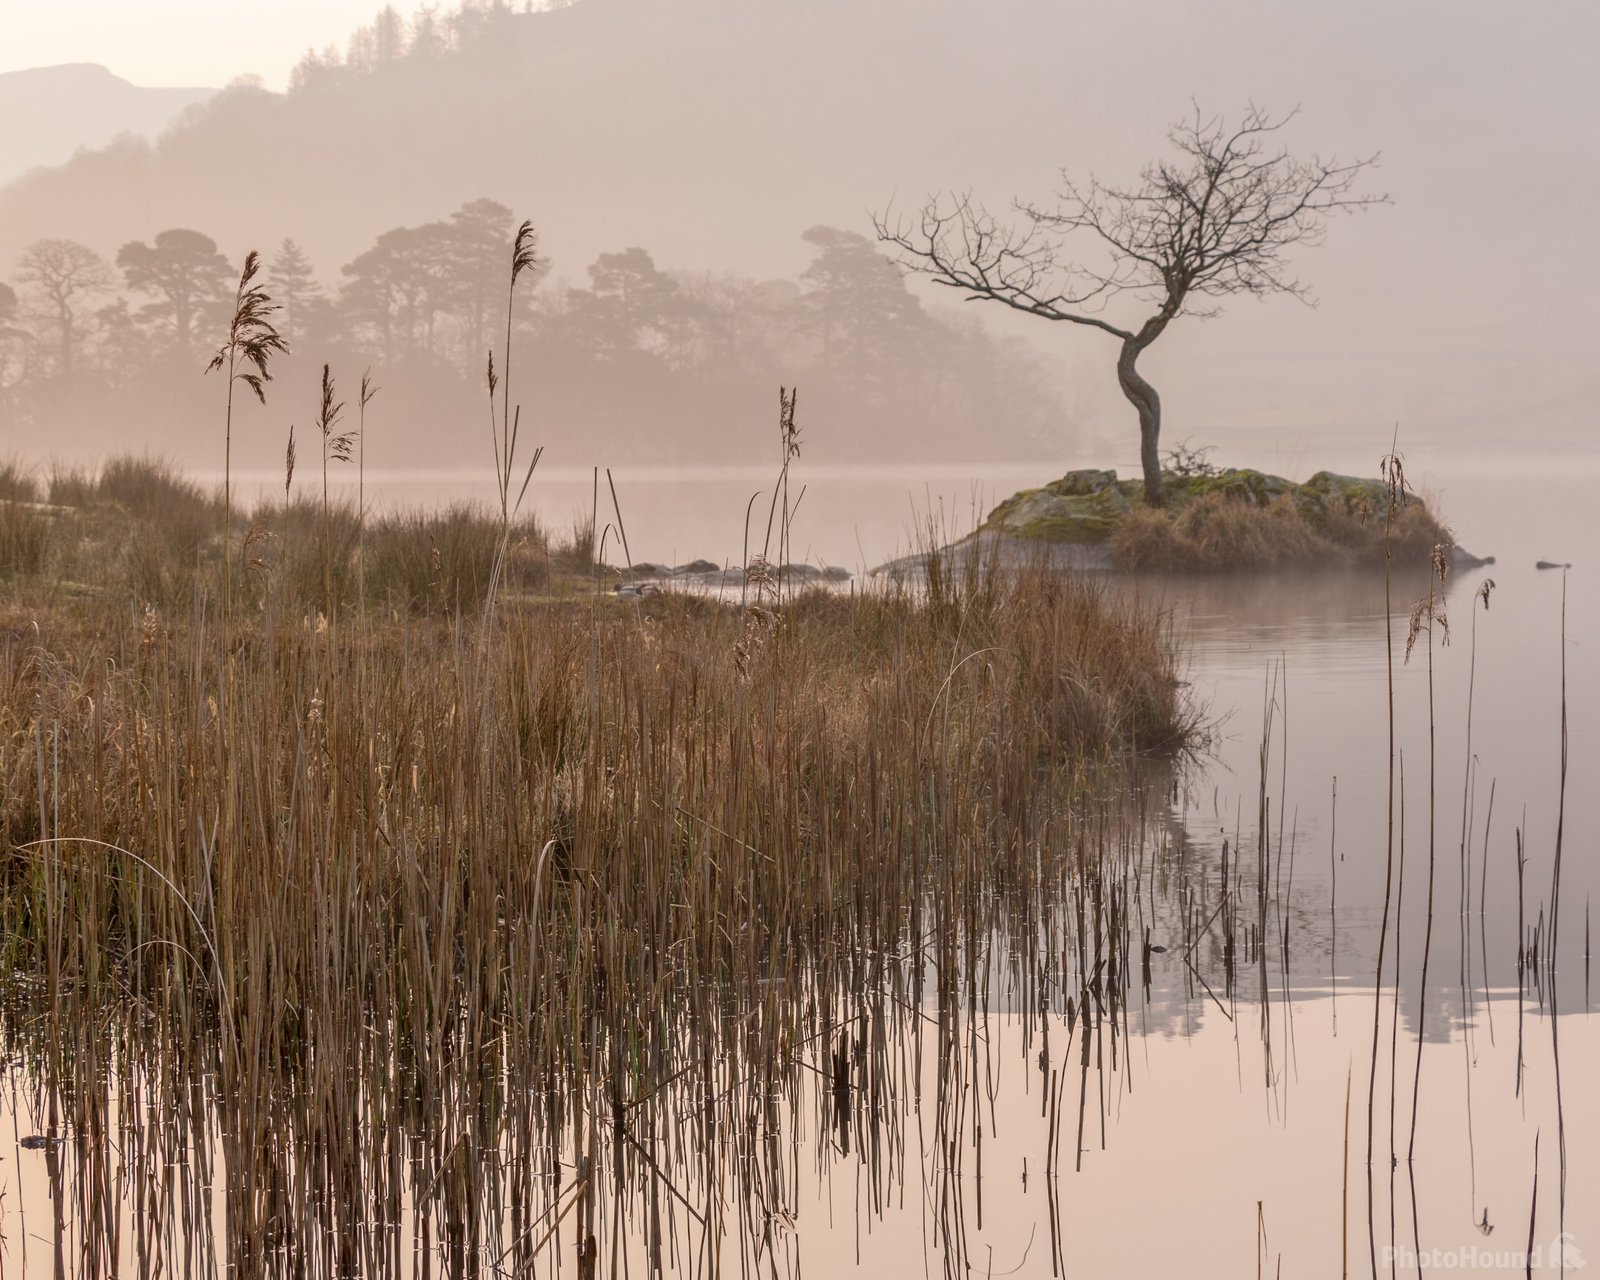 Image of Rydal Water, Lake District by Andy Killingbeck